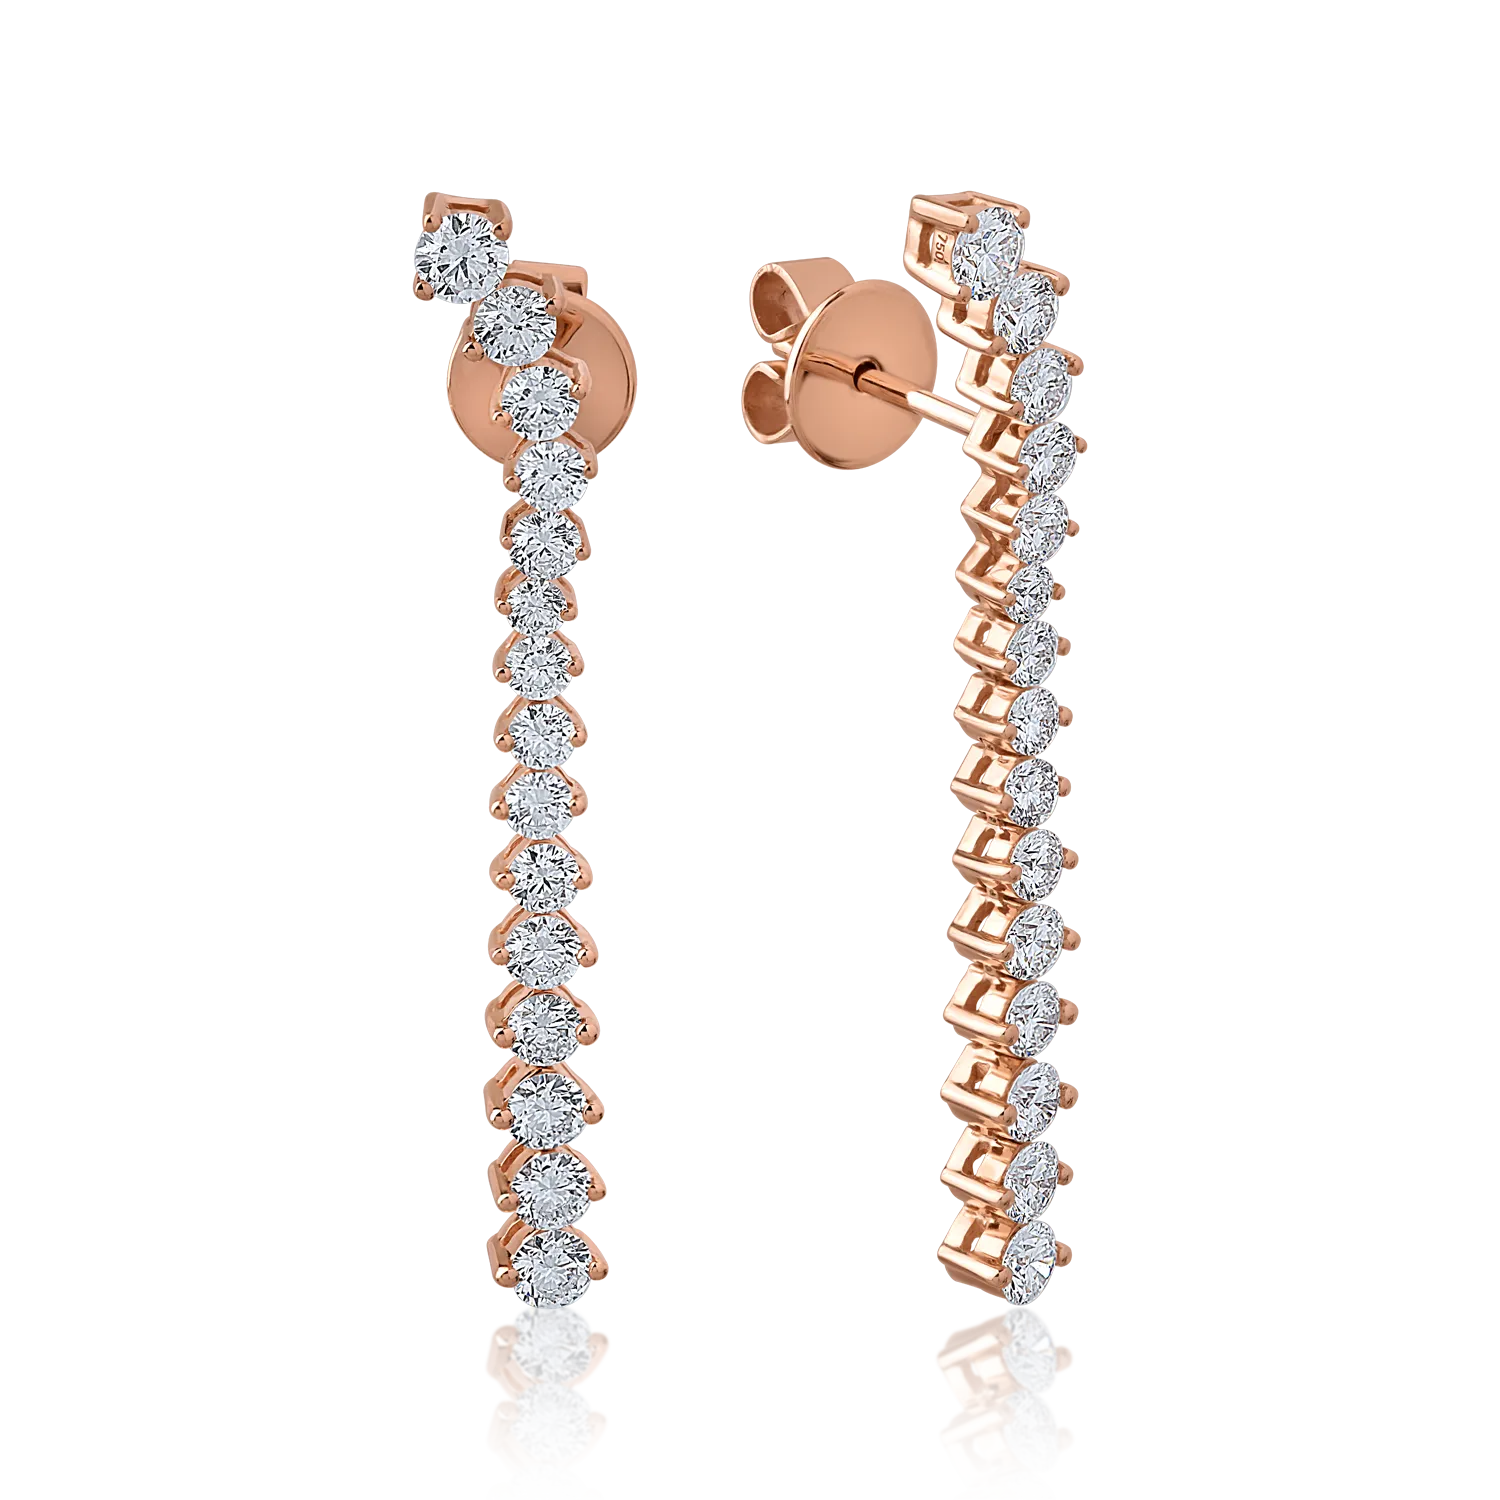 Rose gold earrings with 1.93ct diamonds